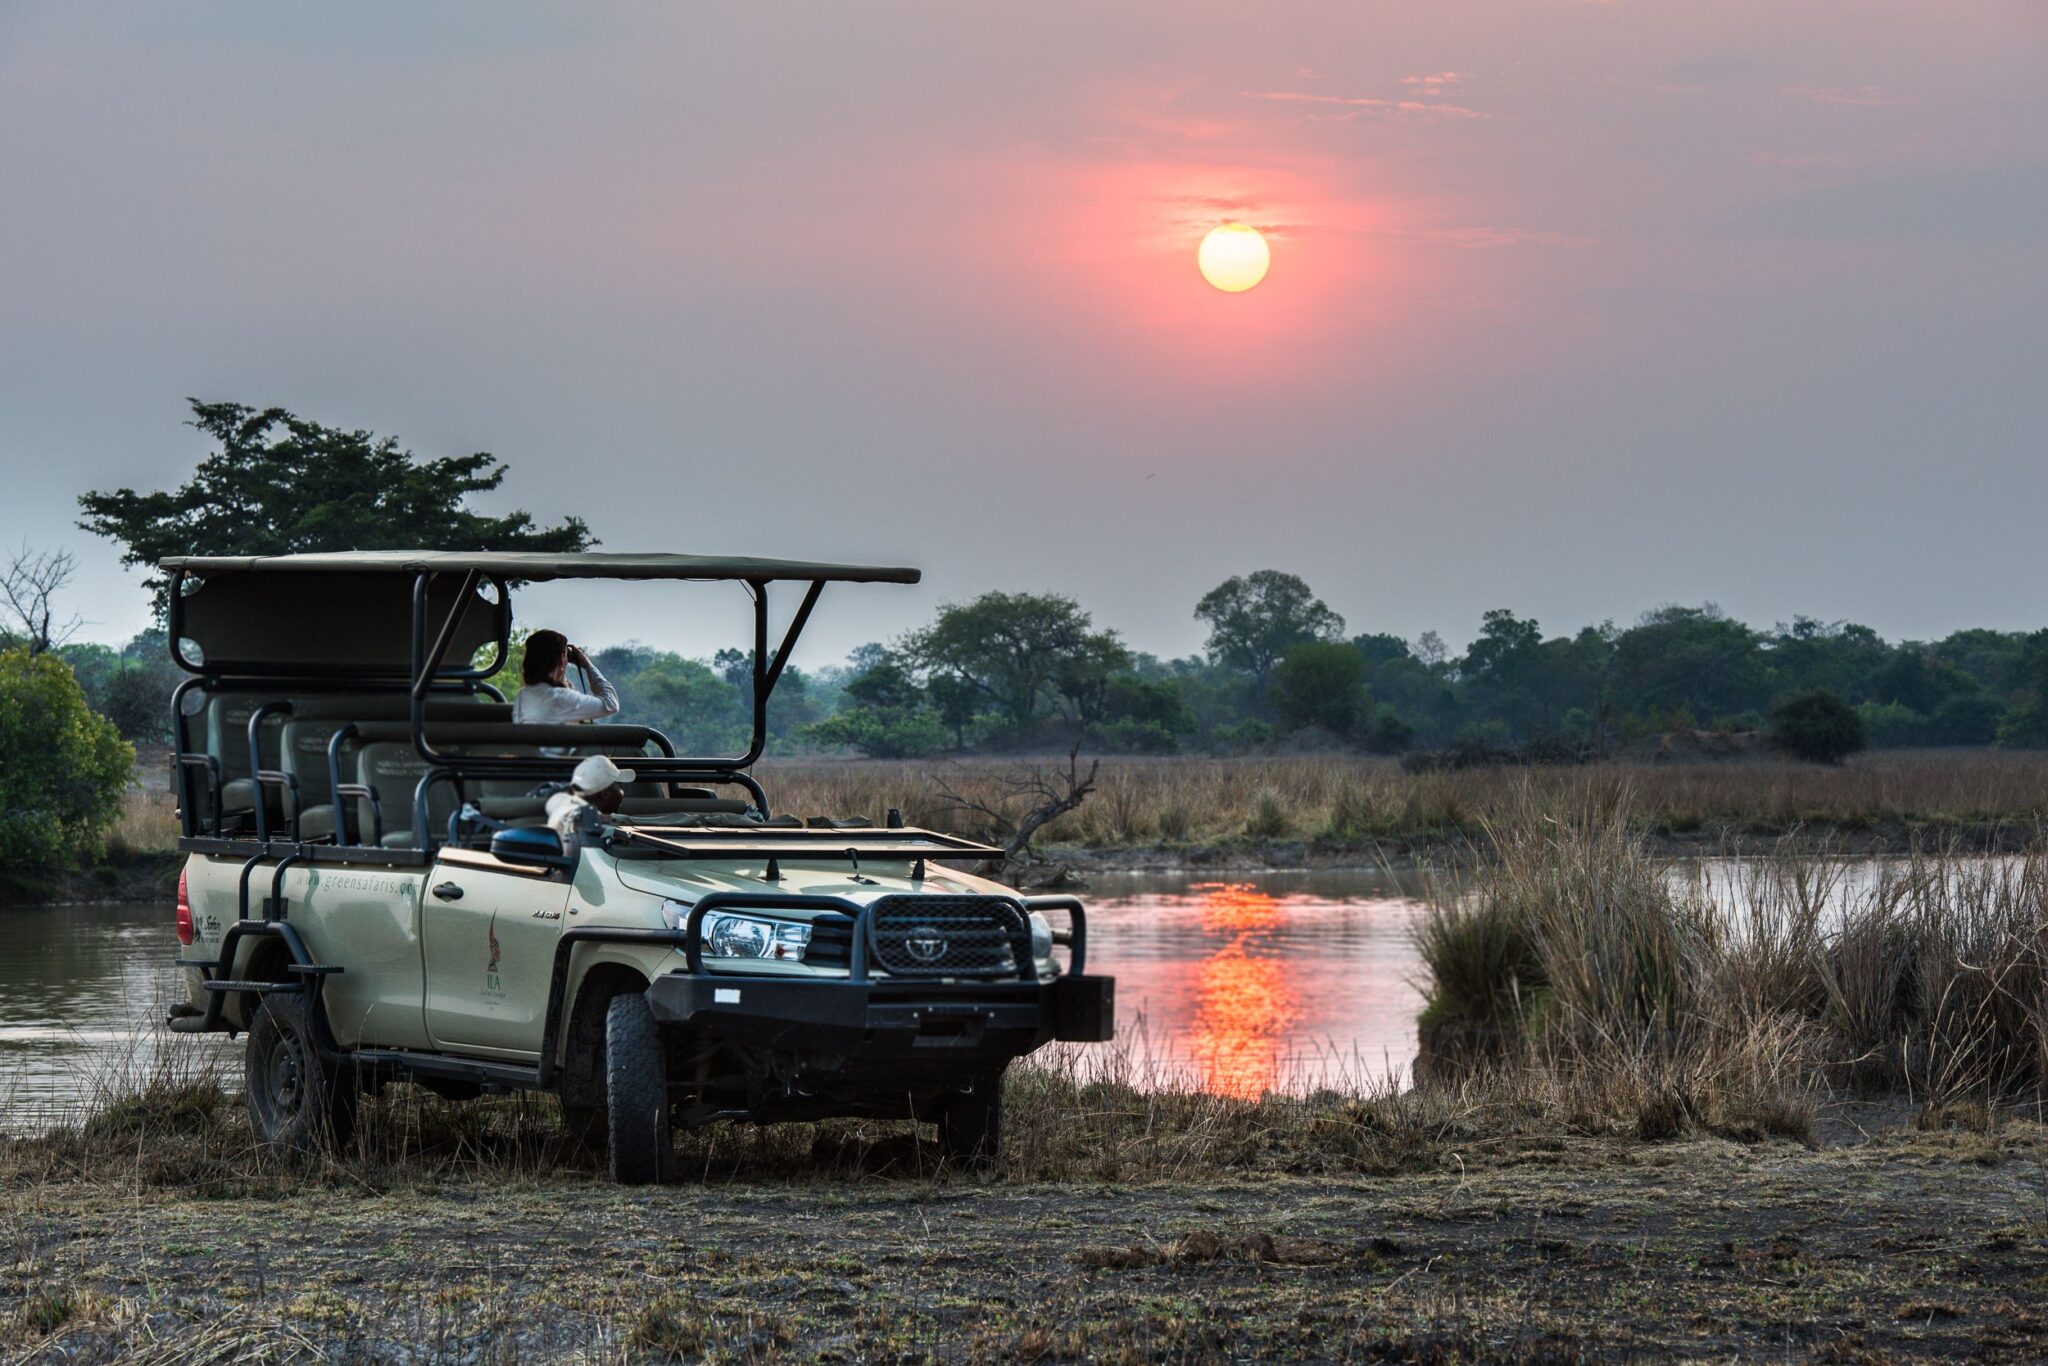 Sunset over Game Drive Scenes